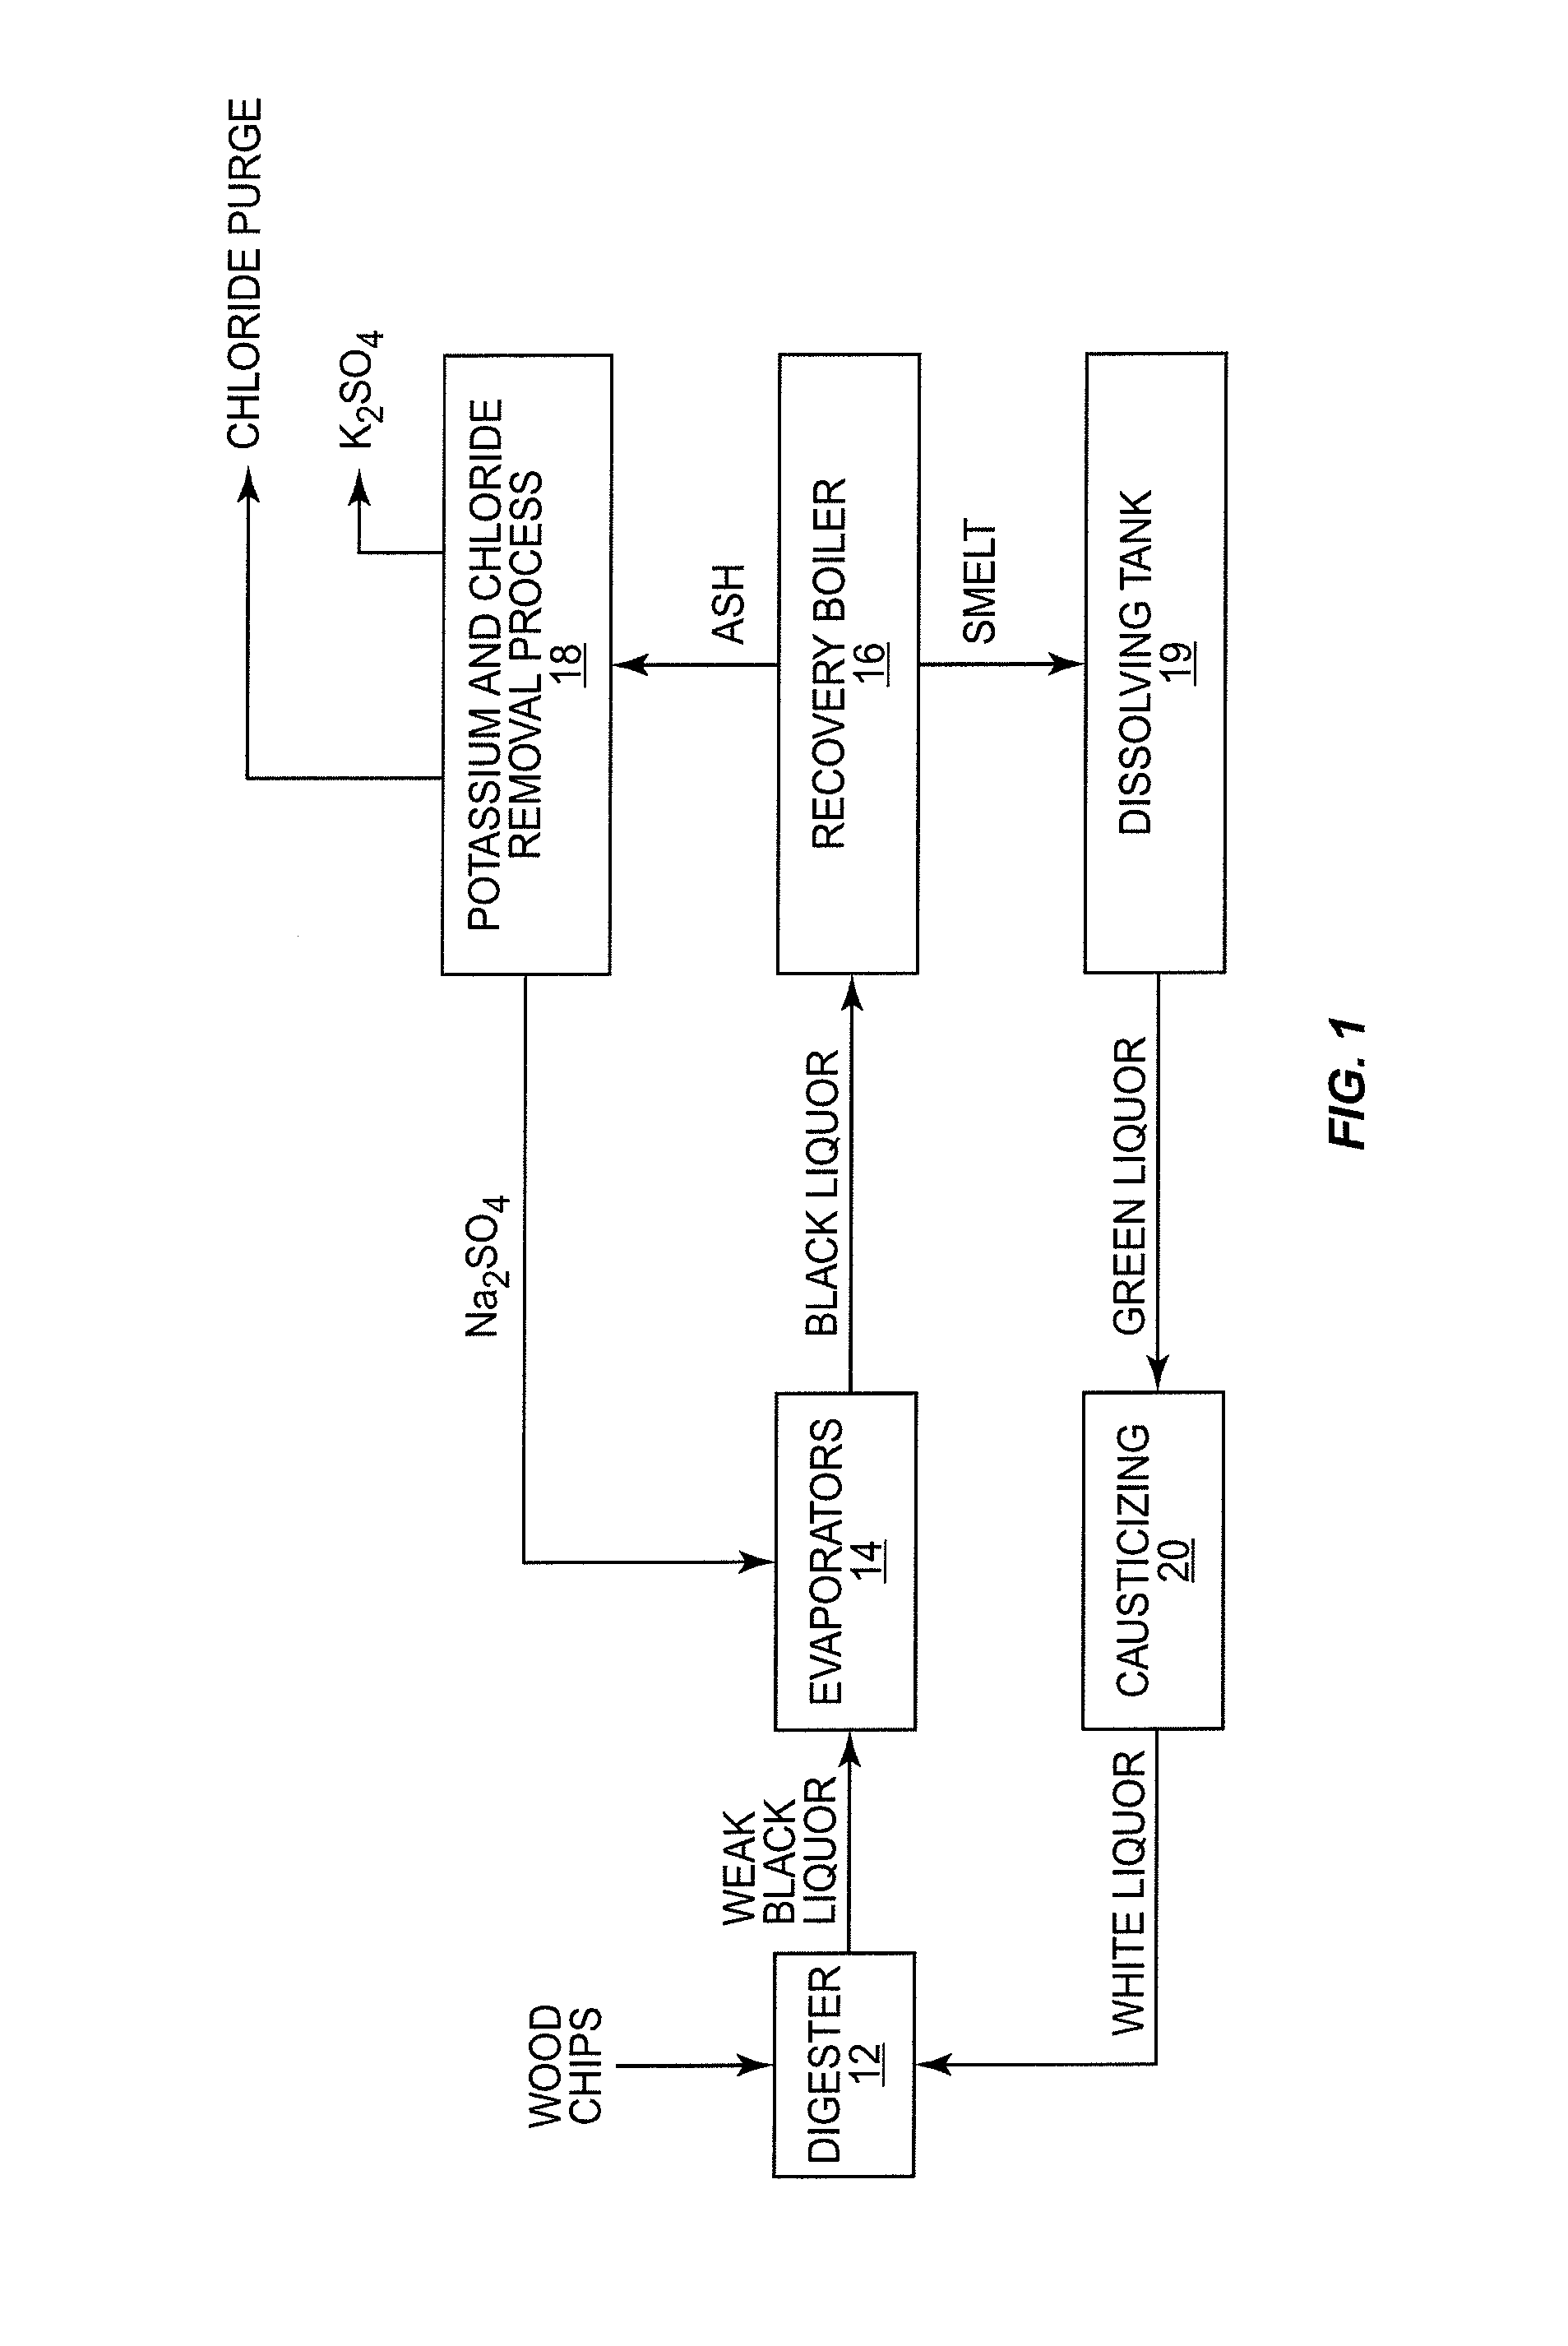 Method for recovering pulping chemicals and reducing the concentration of potassium and chloride therein